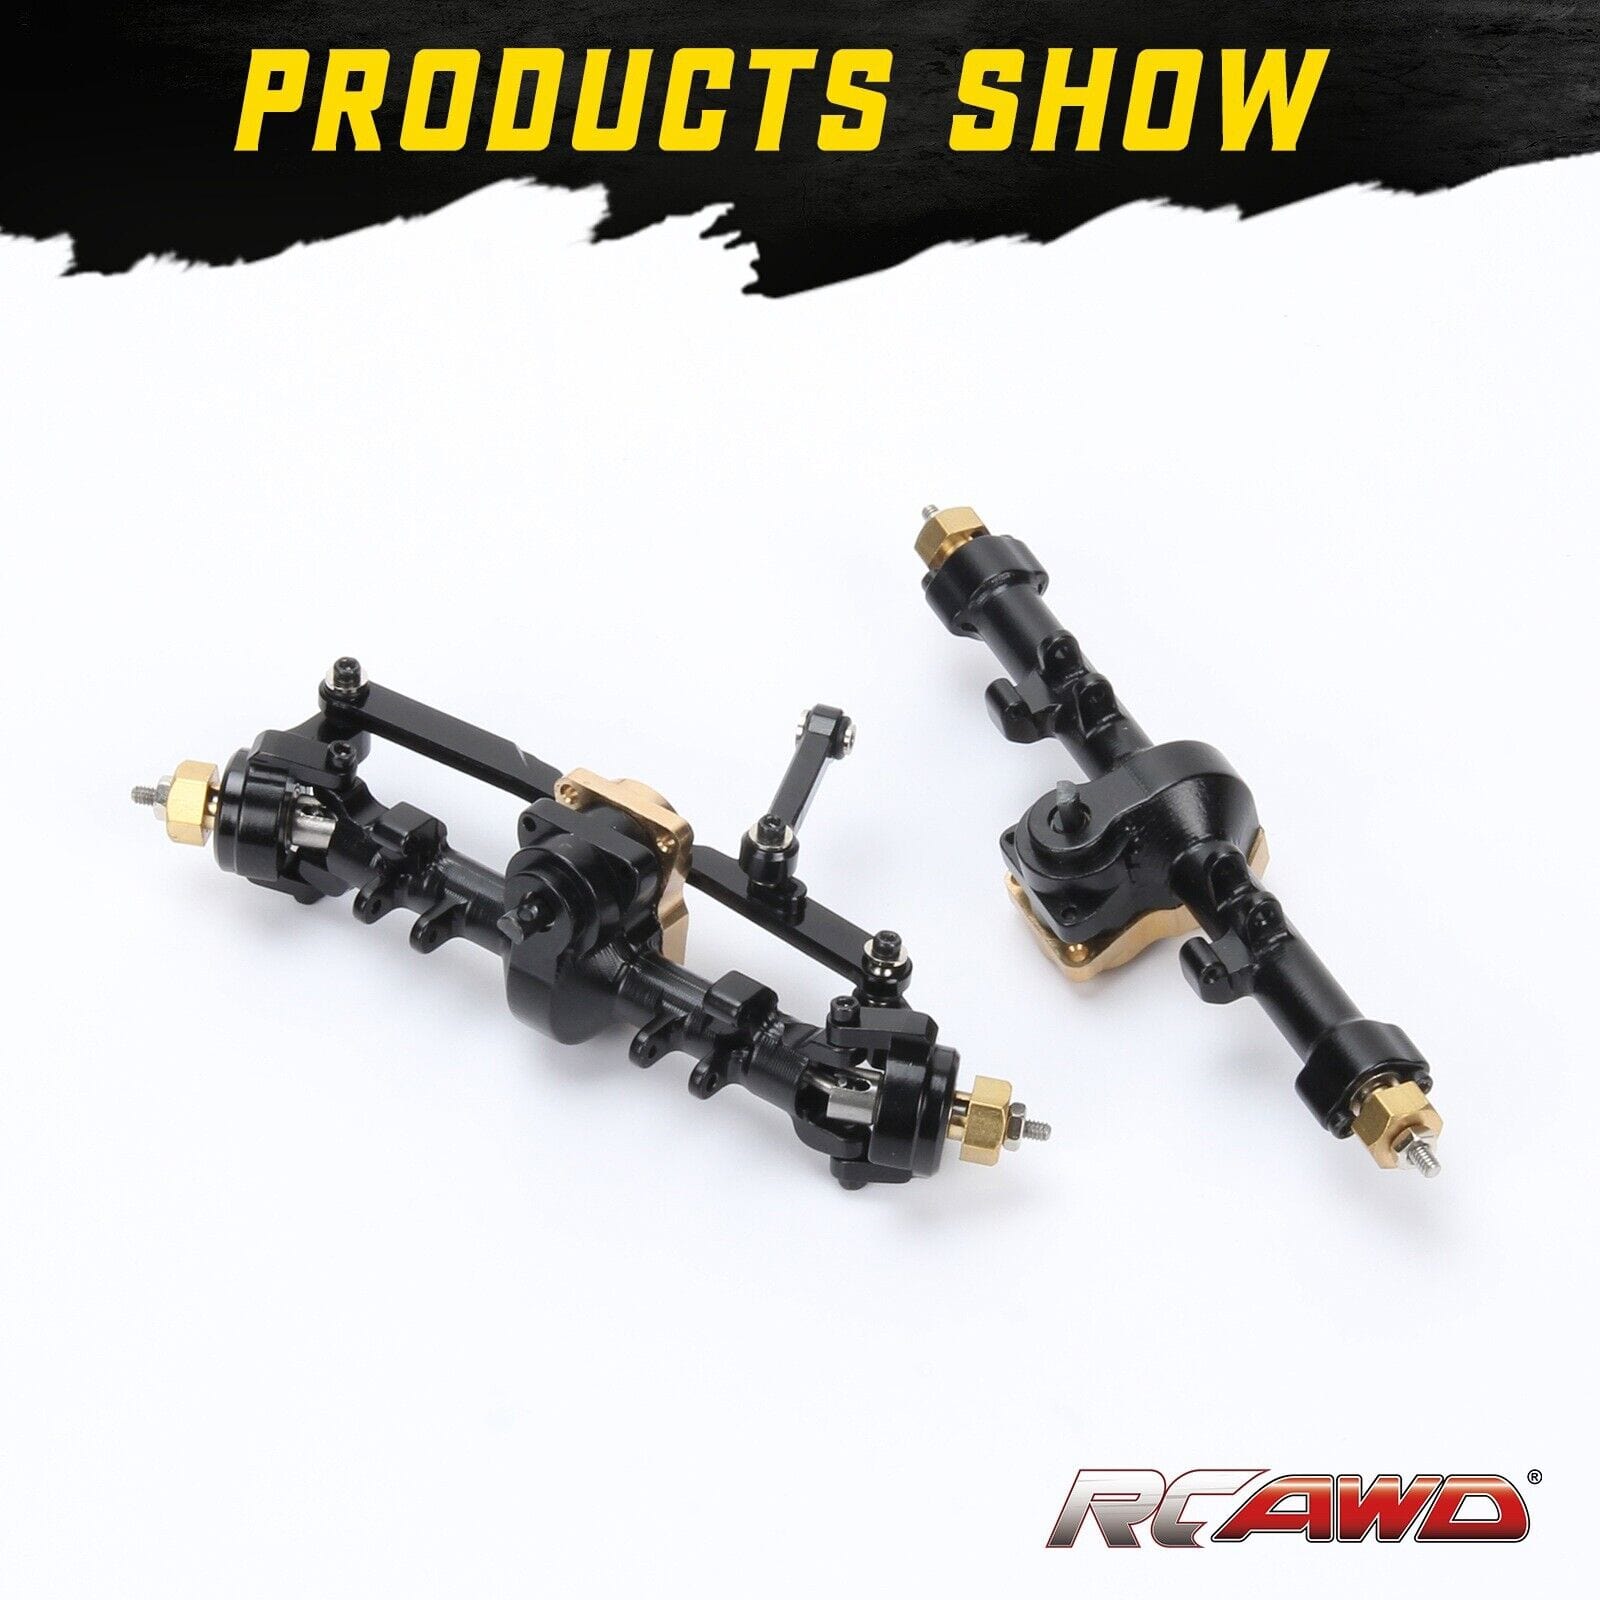 RCAWD RCAWD Alloy Front Rear Axle Housing W/steel Gears for Axial 1/24 SCX24 Crawlers